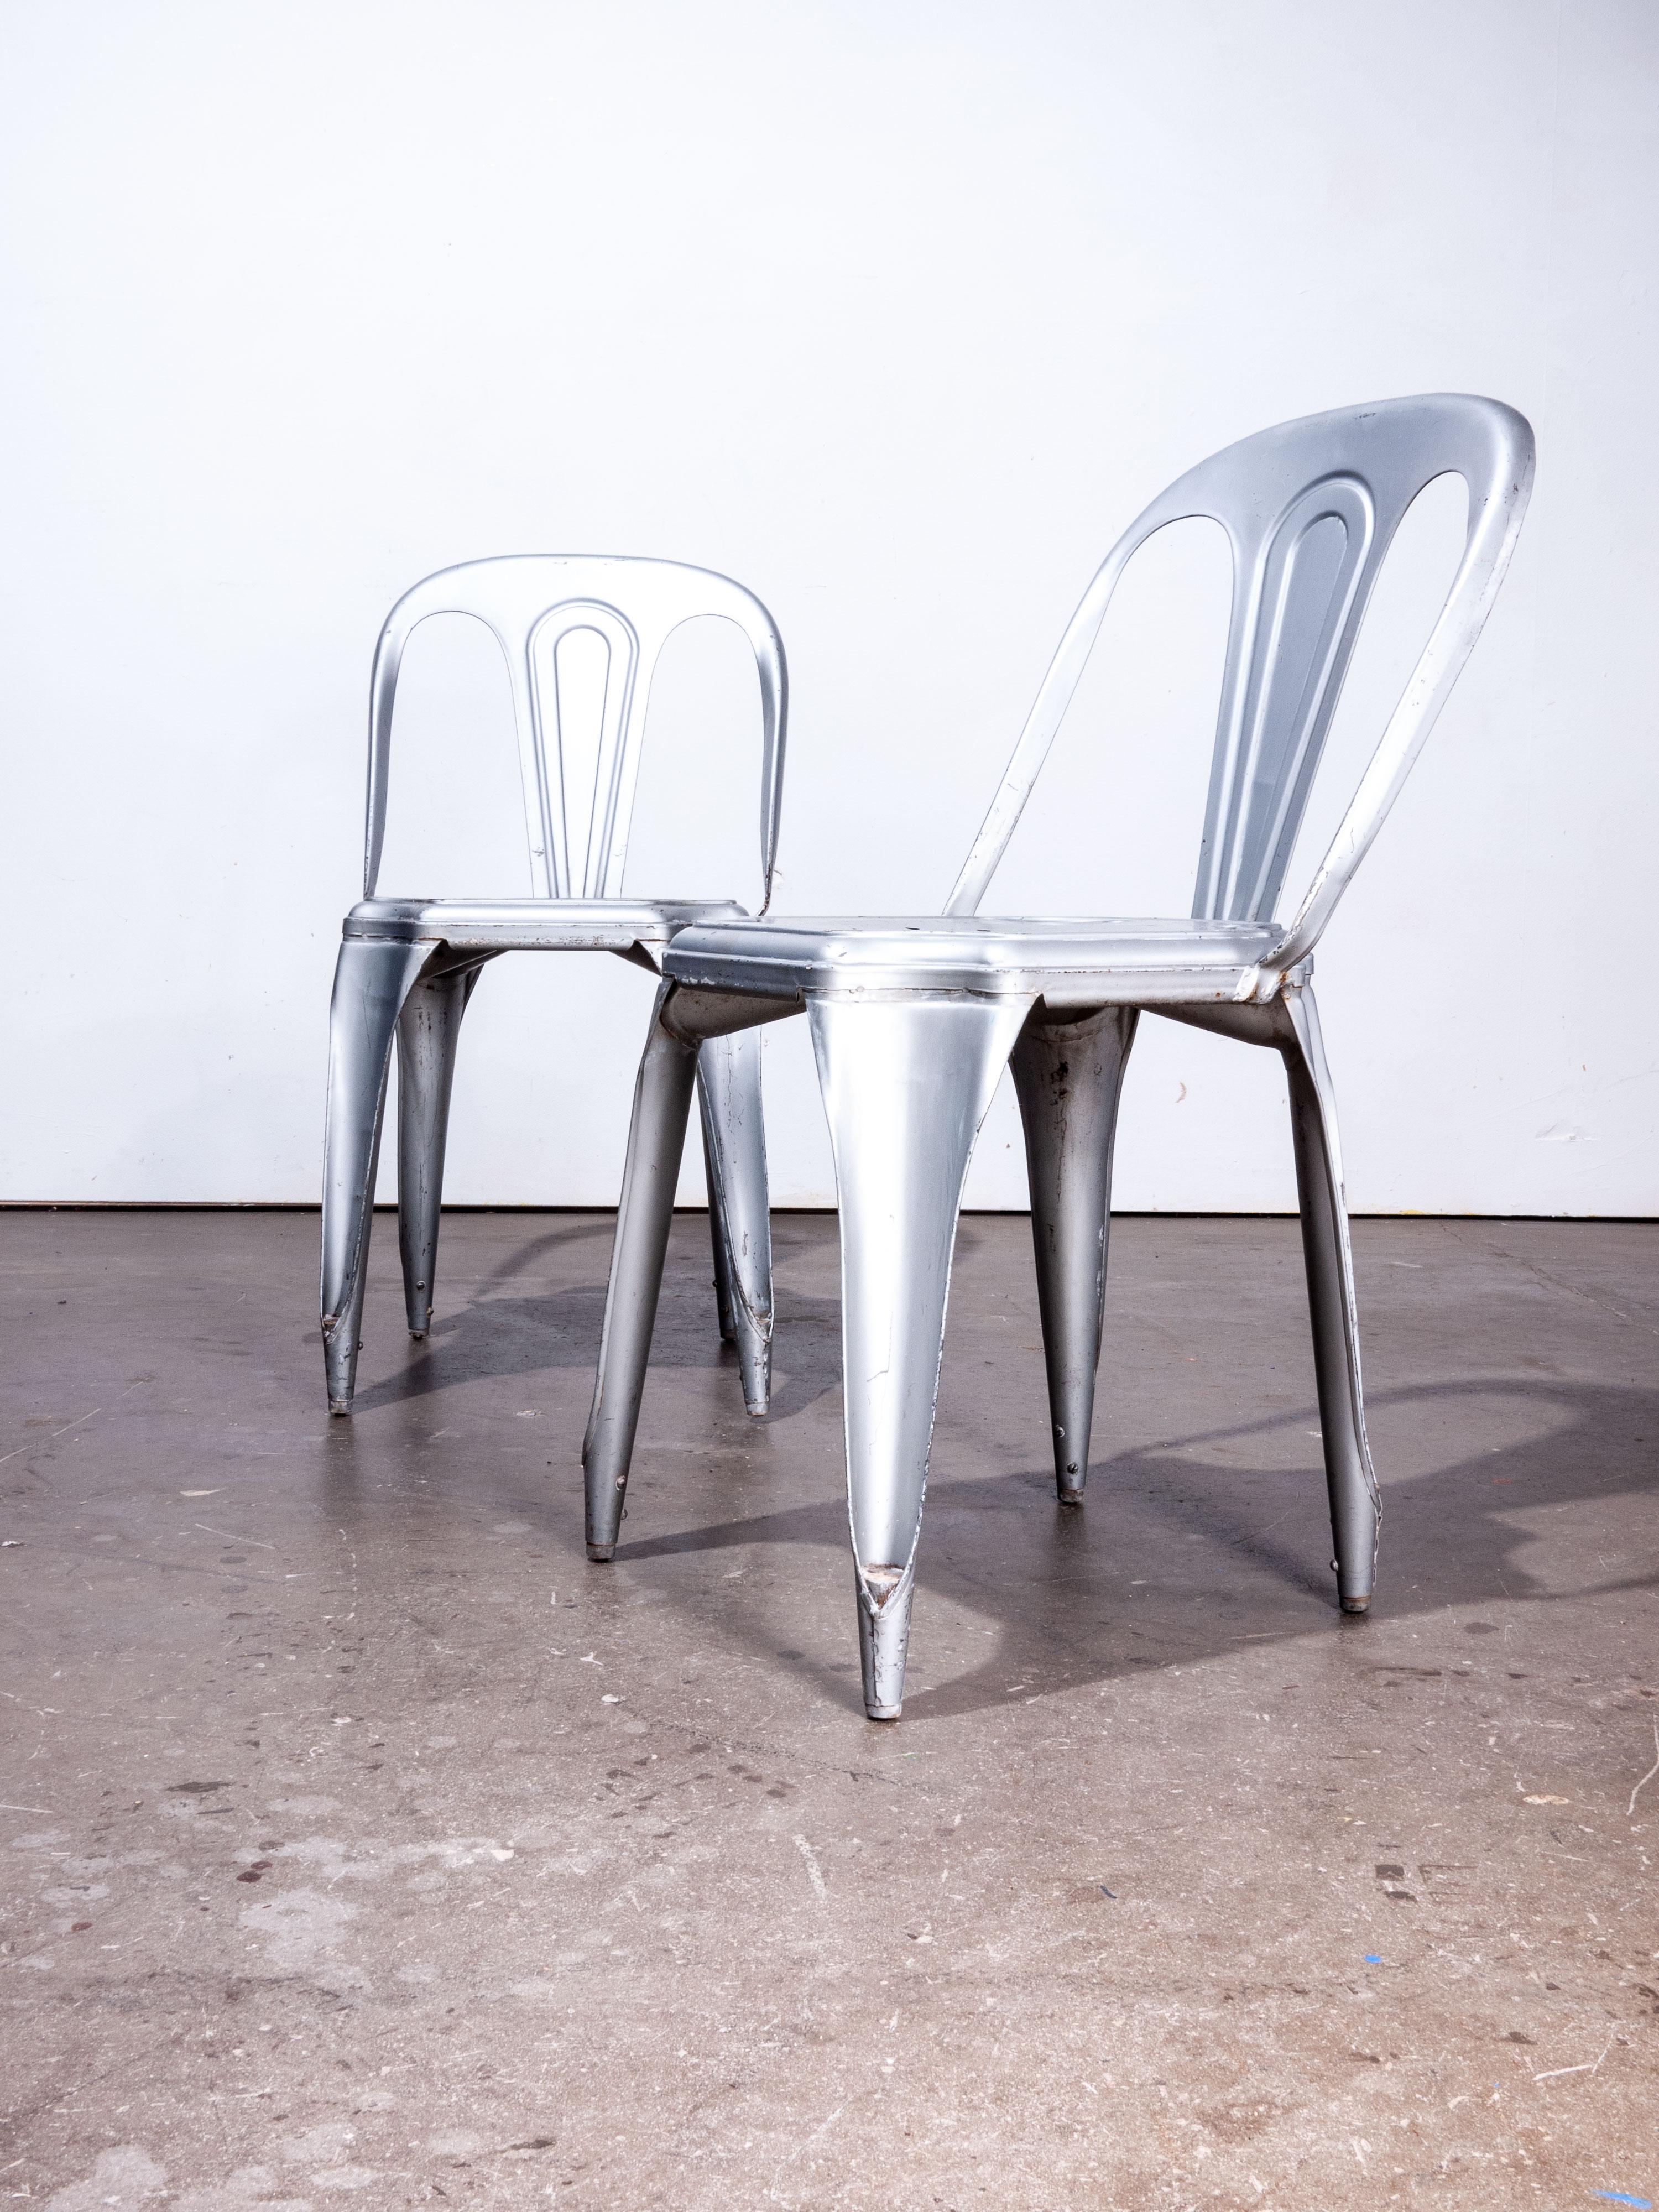 1950s pair of original metal stacking fibrocit dining chairs
1950s pair of original metal stacking Fibrocit dining chairs. Founded in Belgium in 1920 by Antony Neuckens, Fibrocit started by importing fibrous cement acoustic tiles for theatres and